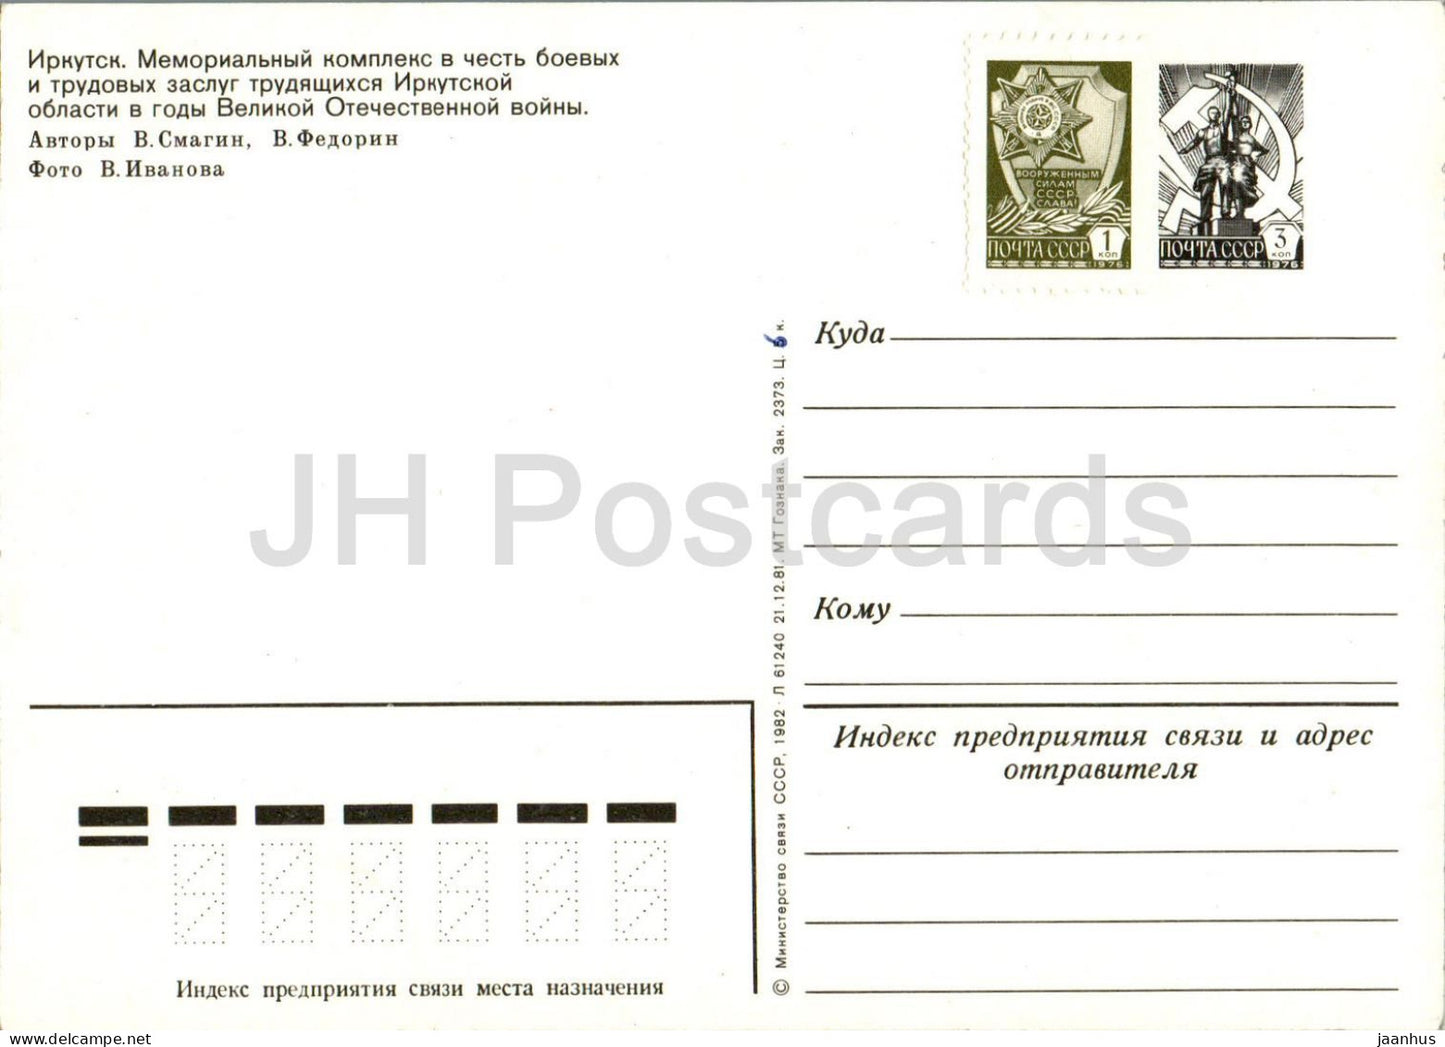 Irkutsk - Memorial complex in honor of military and labor merits - 1 - postal stationery - 1982 - Russia USSR - unused